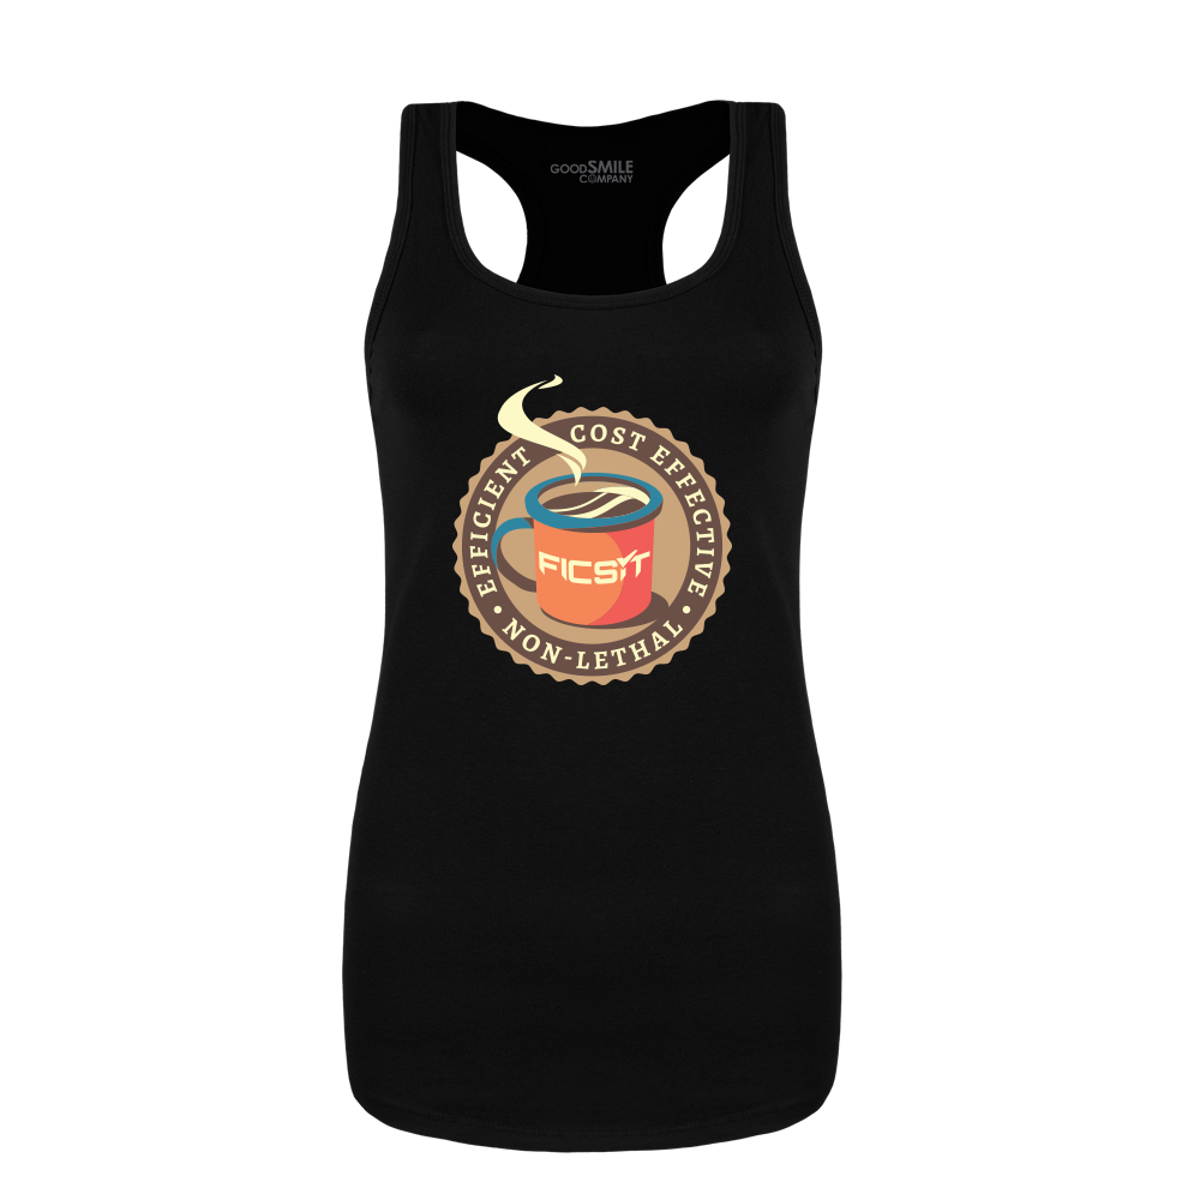 Efficient, Cost Effective, Non-Lethal Women's Tank Top